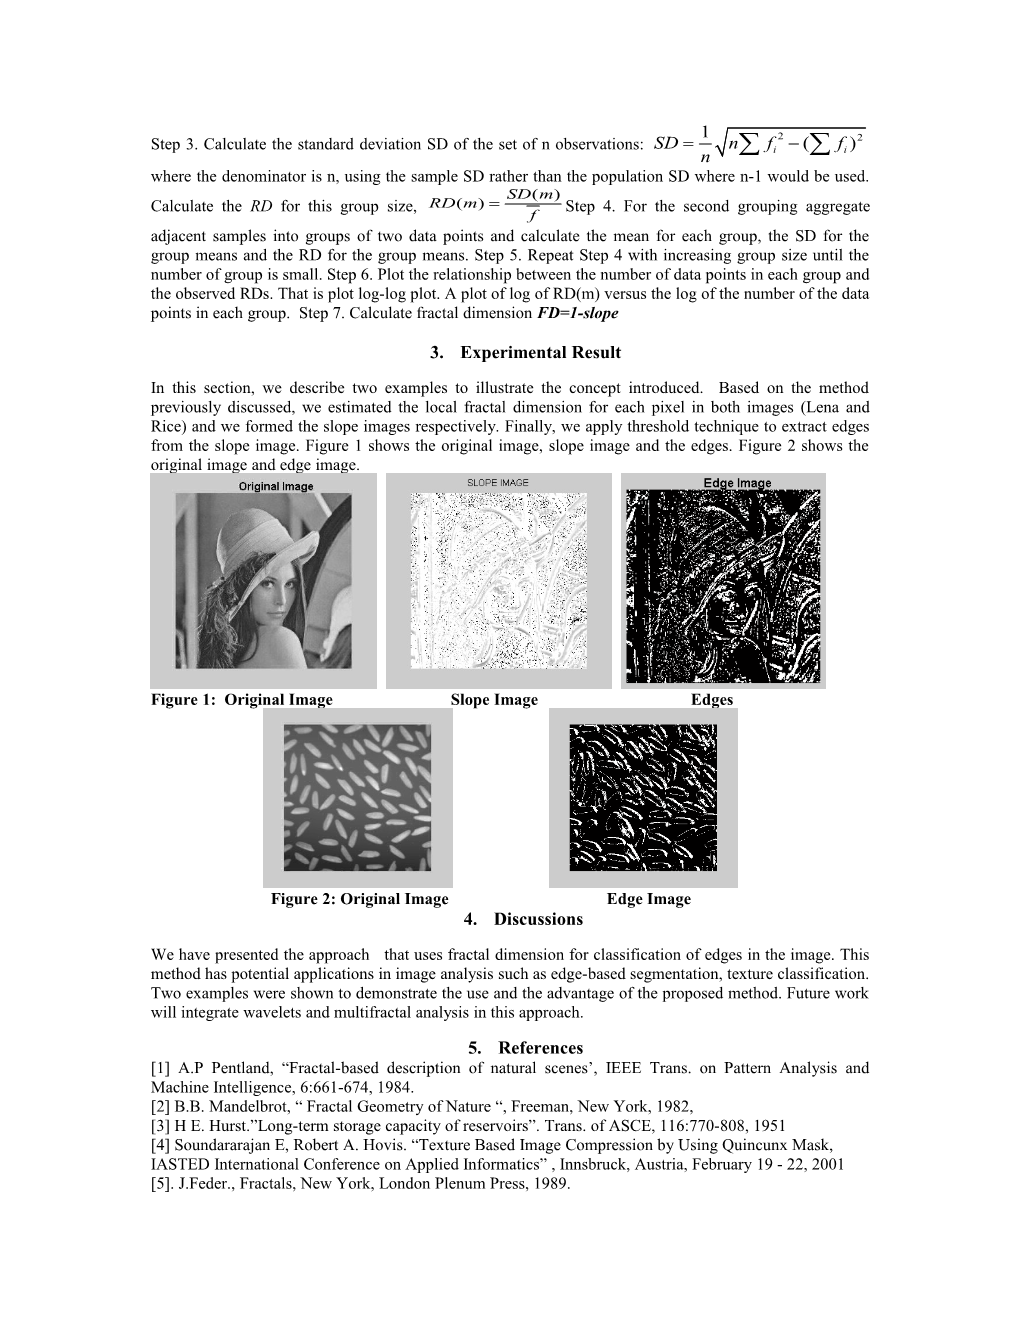 Edge Detection by Relative Dispersion Analysis Based Fractal Dimension